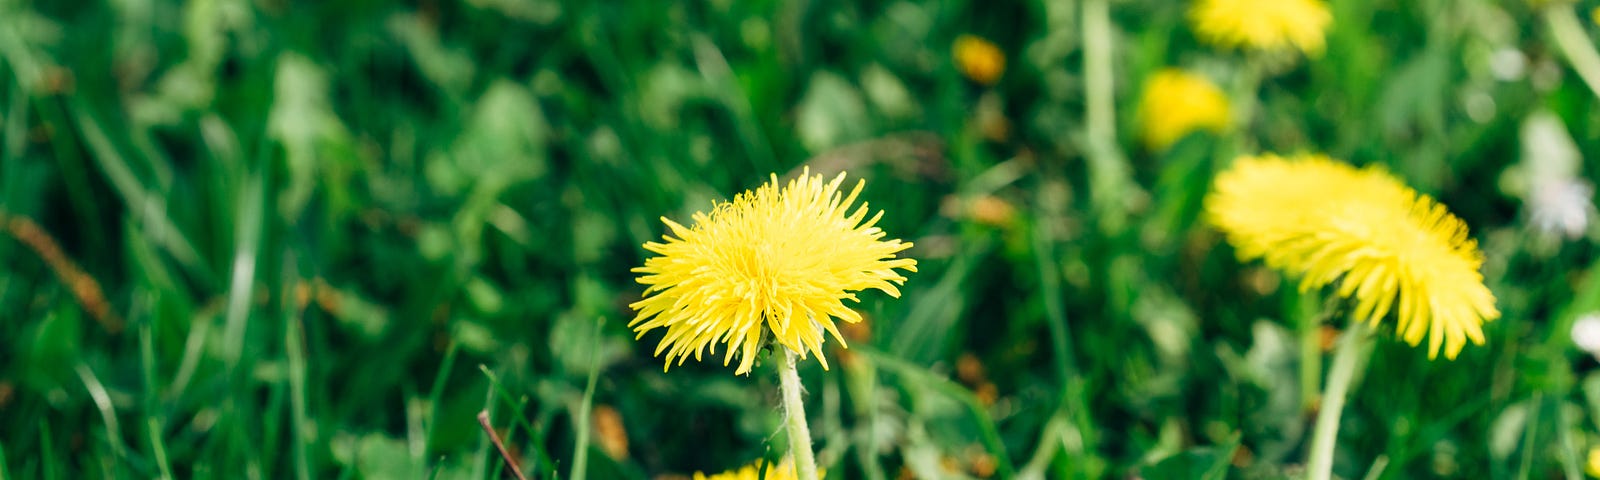 A close up of bright yellow dandelions growing in long green grass.